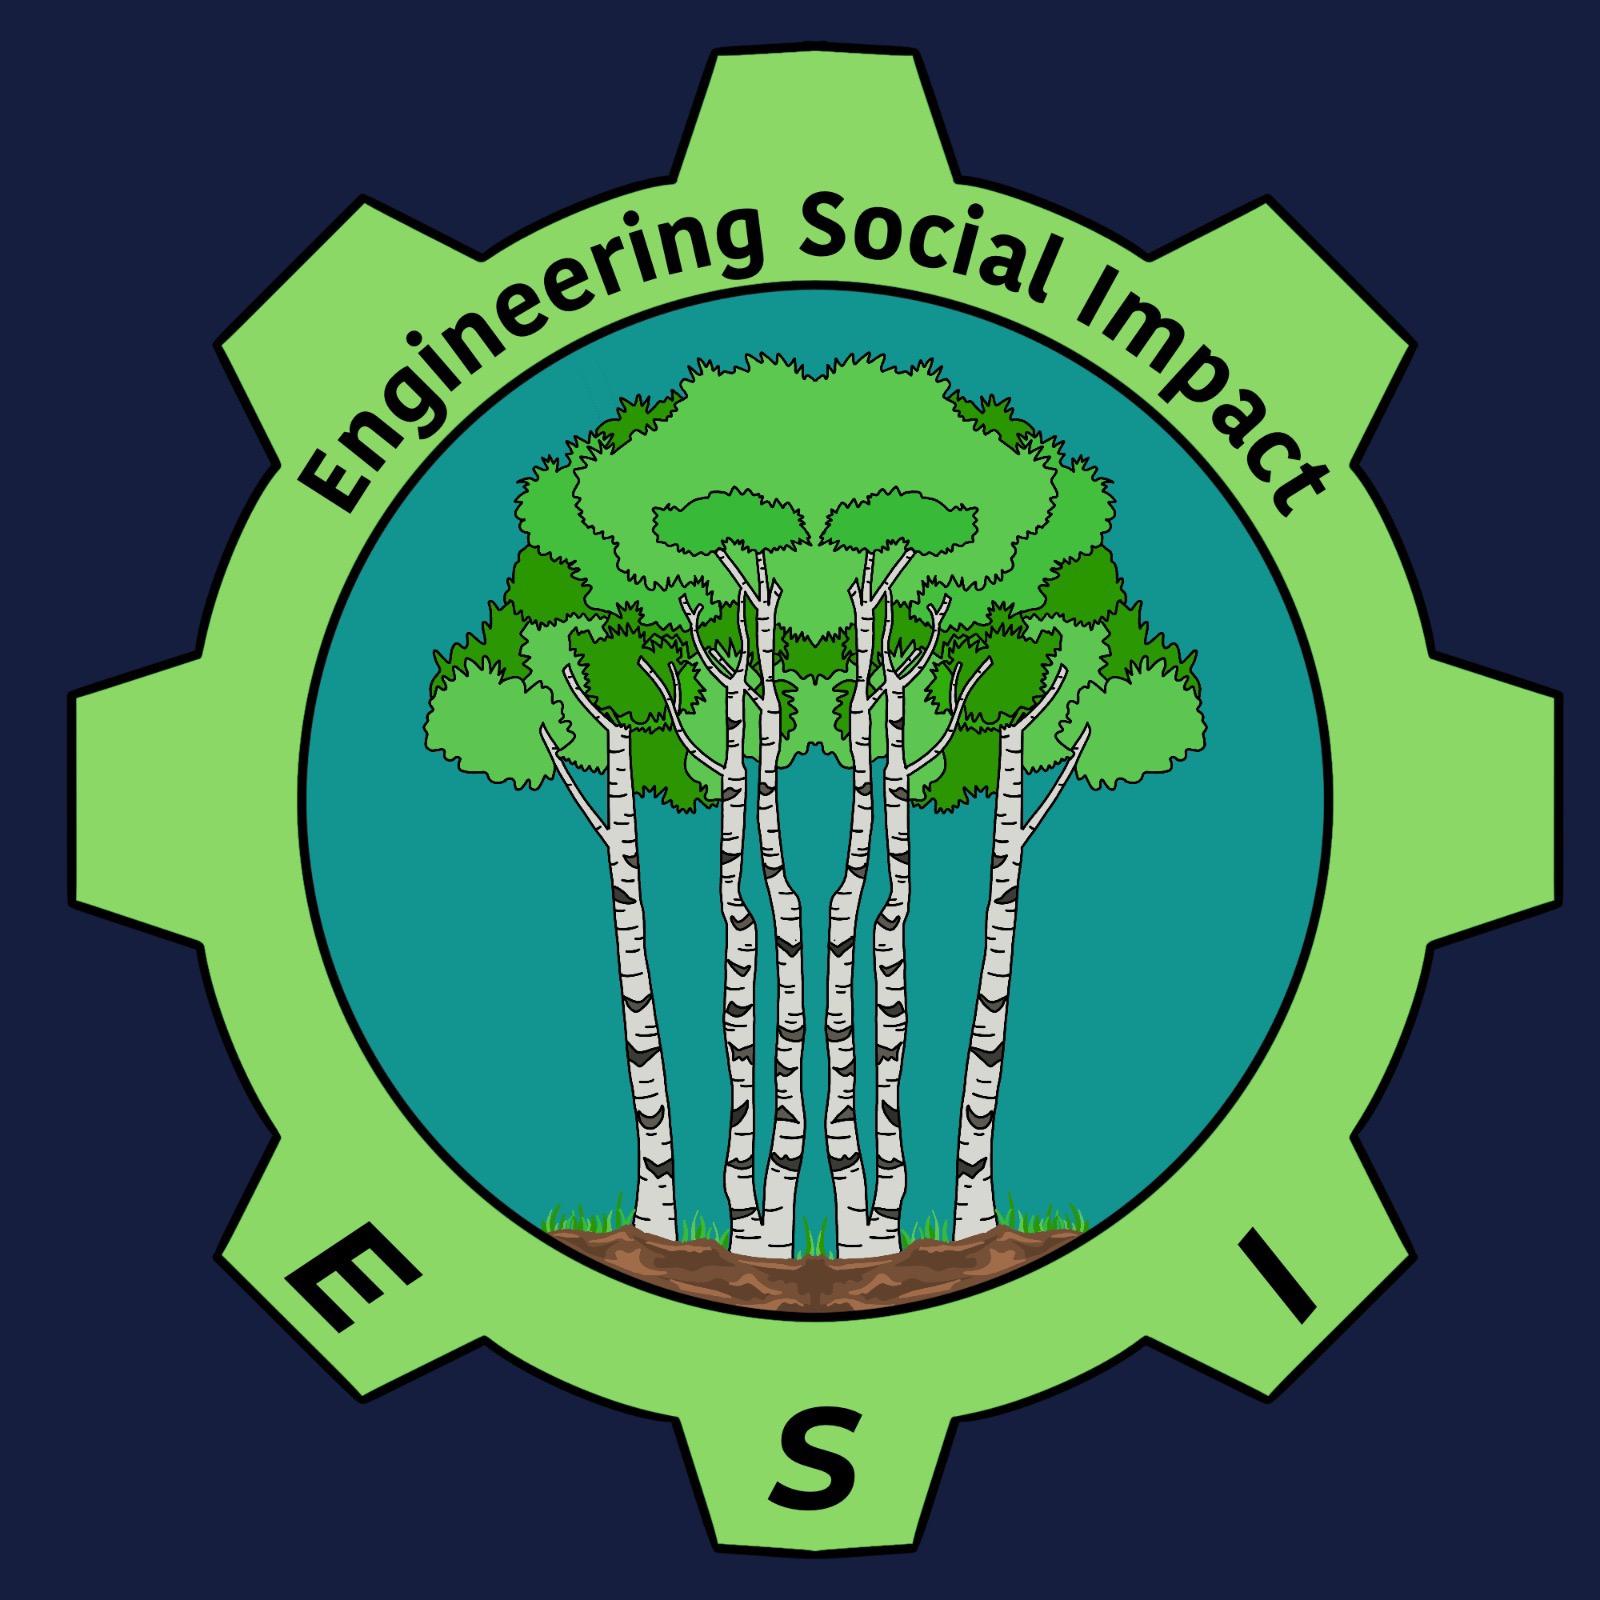 Green gear with aspen trees in the center. Engineering Social Impact is written on the top and the bottom says ESI.